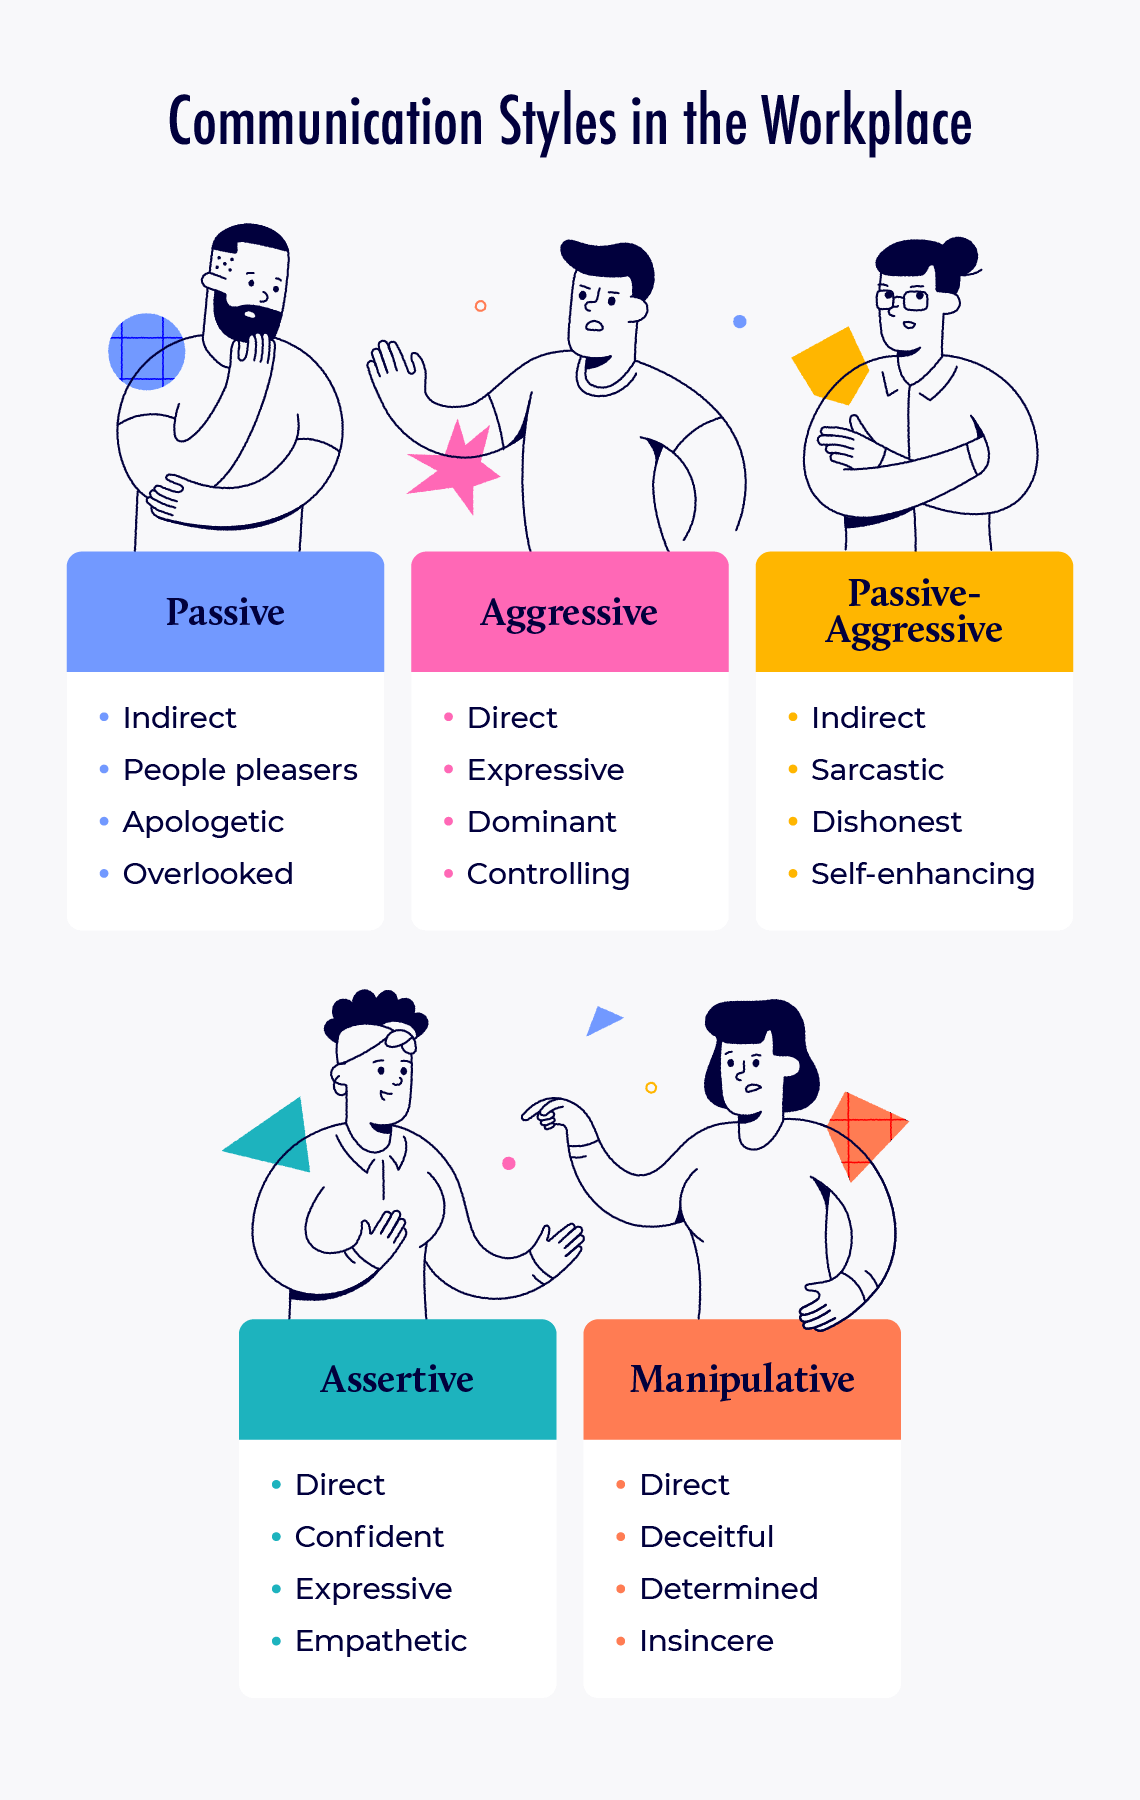 Communication styles in the workplace